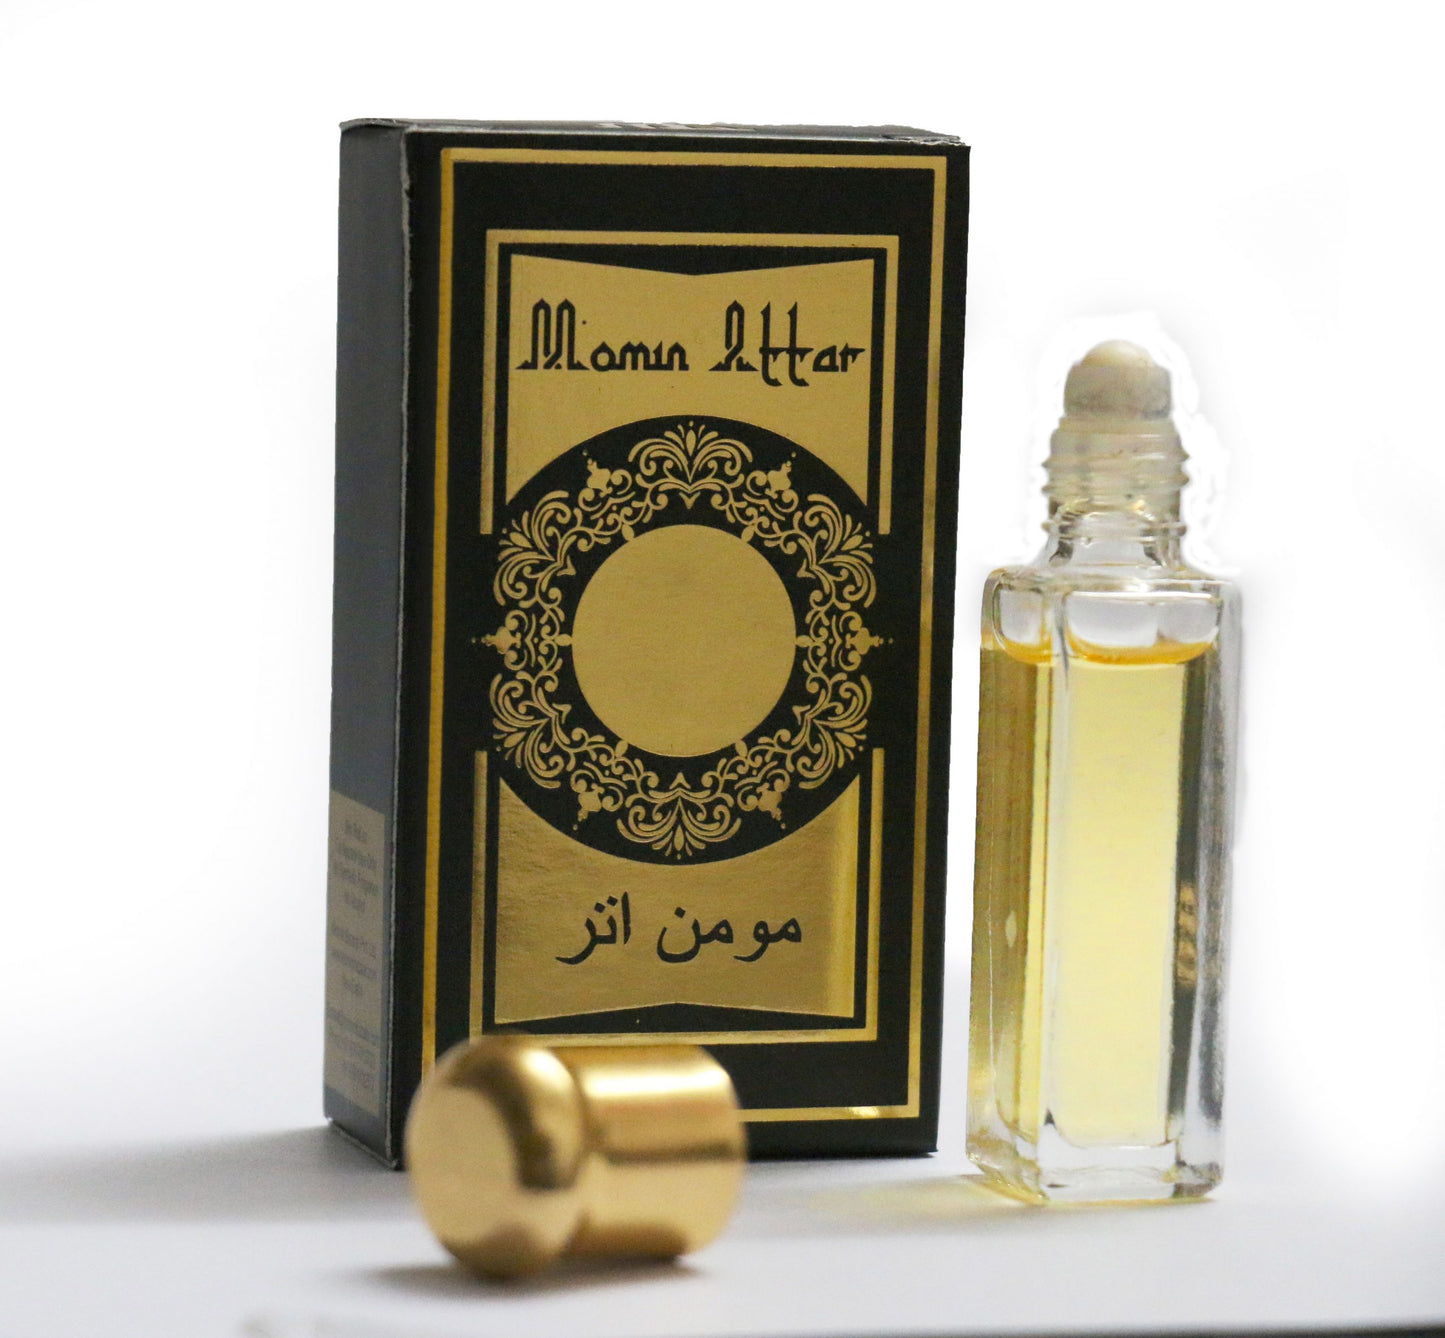 "MOGRA" PURE NATURAL ATTAR  FRAGRANCE ONLY TO BE SOLD IN INDIA